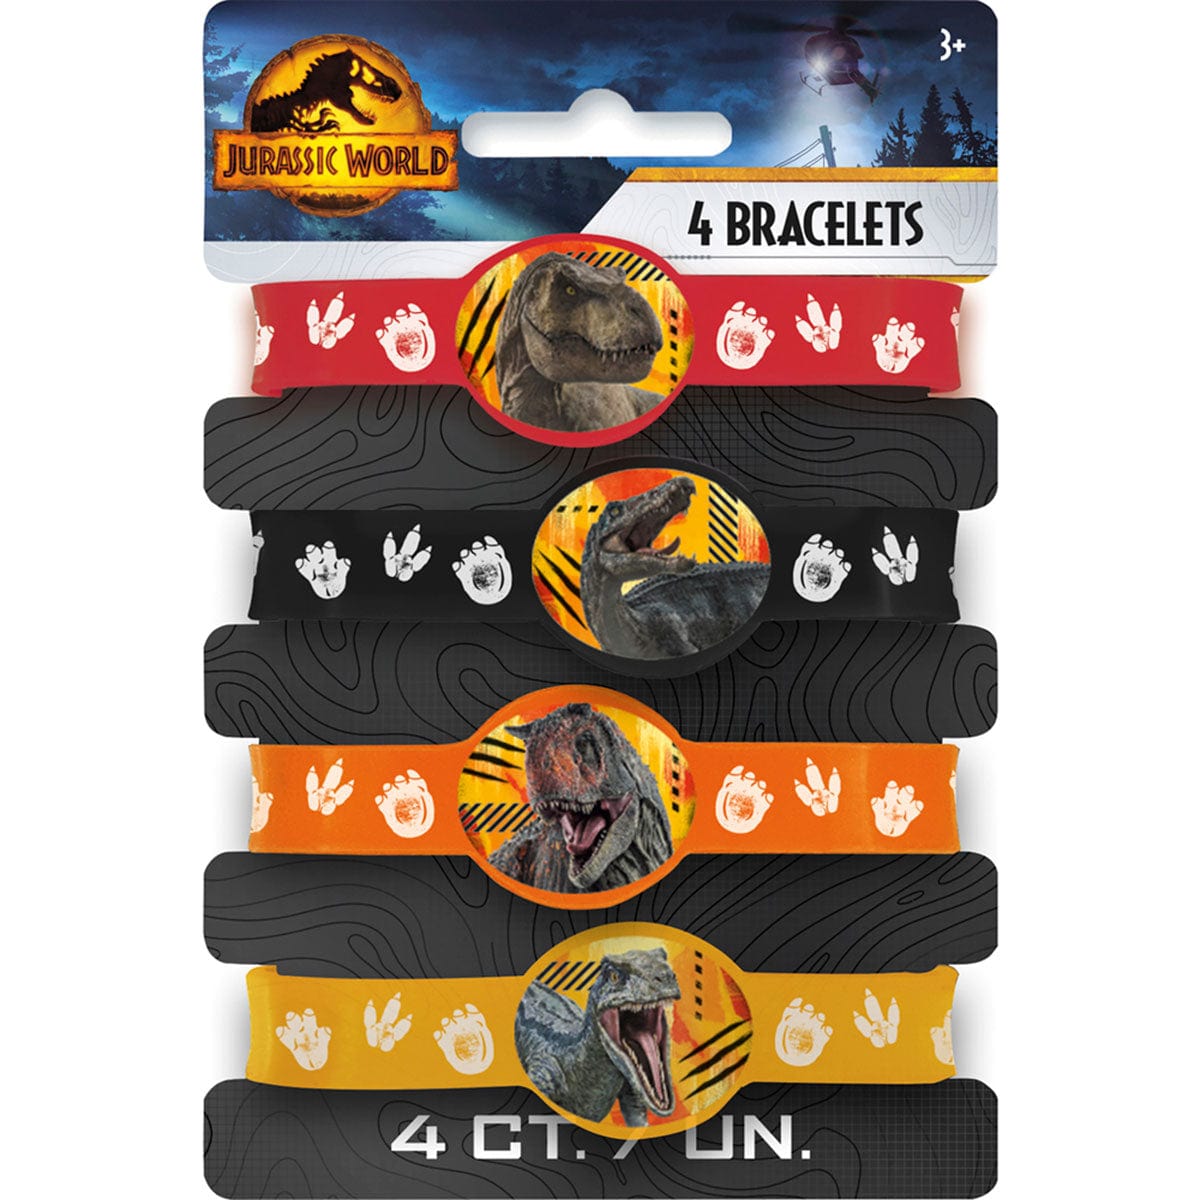 UNIQUE PARTY FAVORS Kids Birthday Jurassic World Silicon Strechy Bracelets, Red, Black, Yellow and Orange, 4 Count